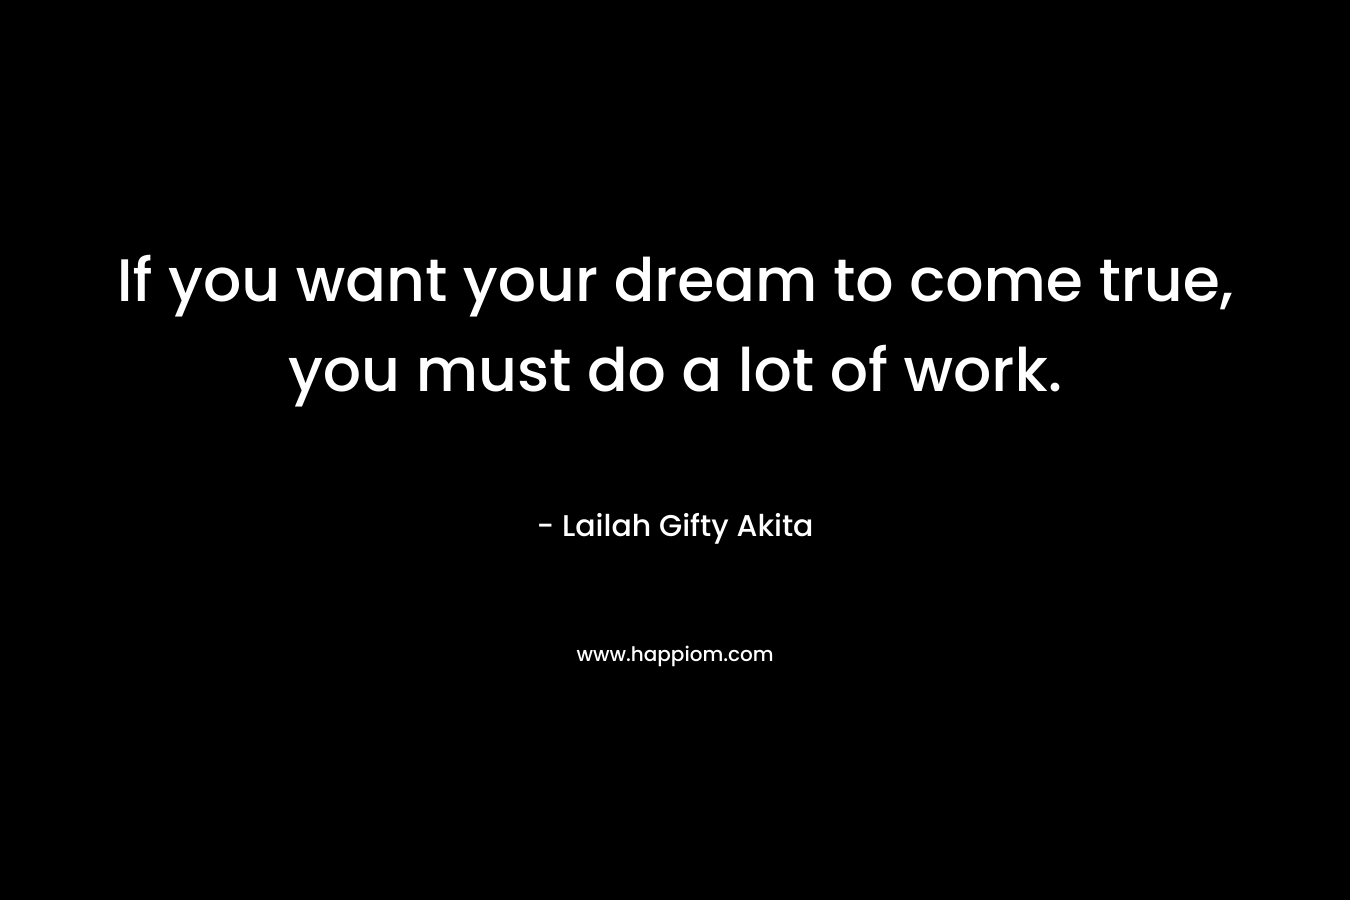 If you want your dream to come true, you must do a lot of work.